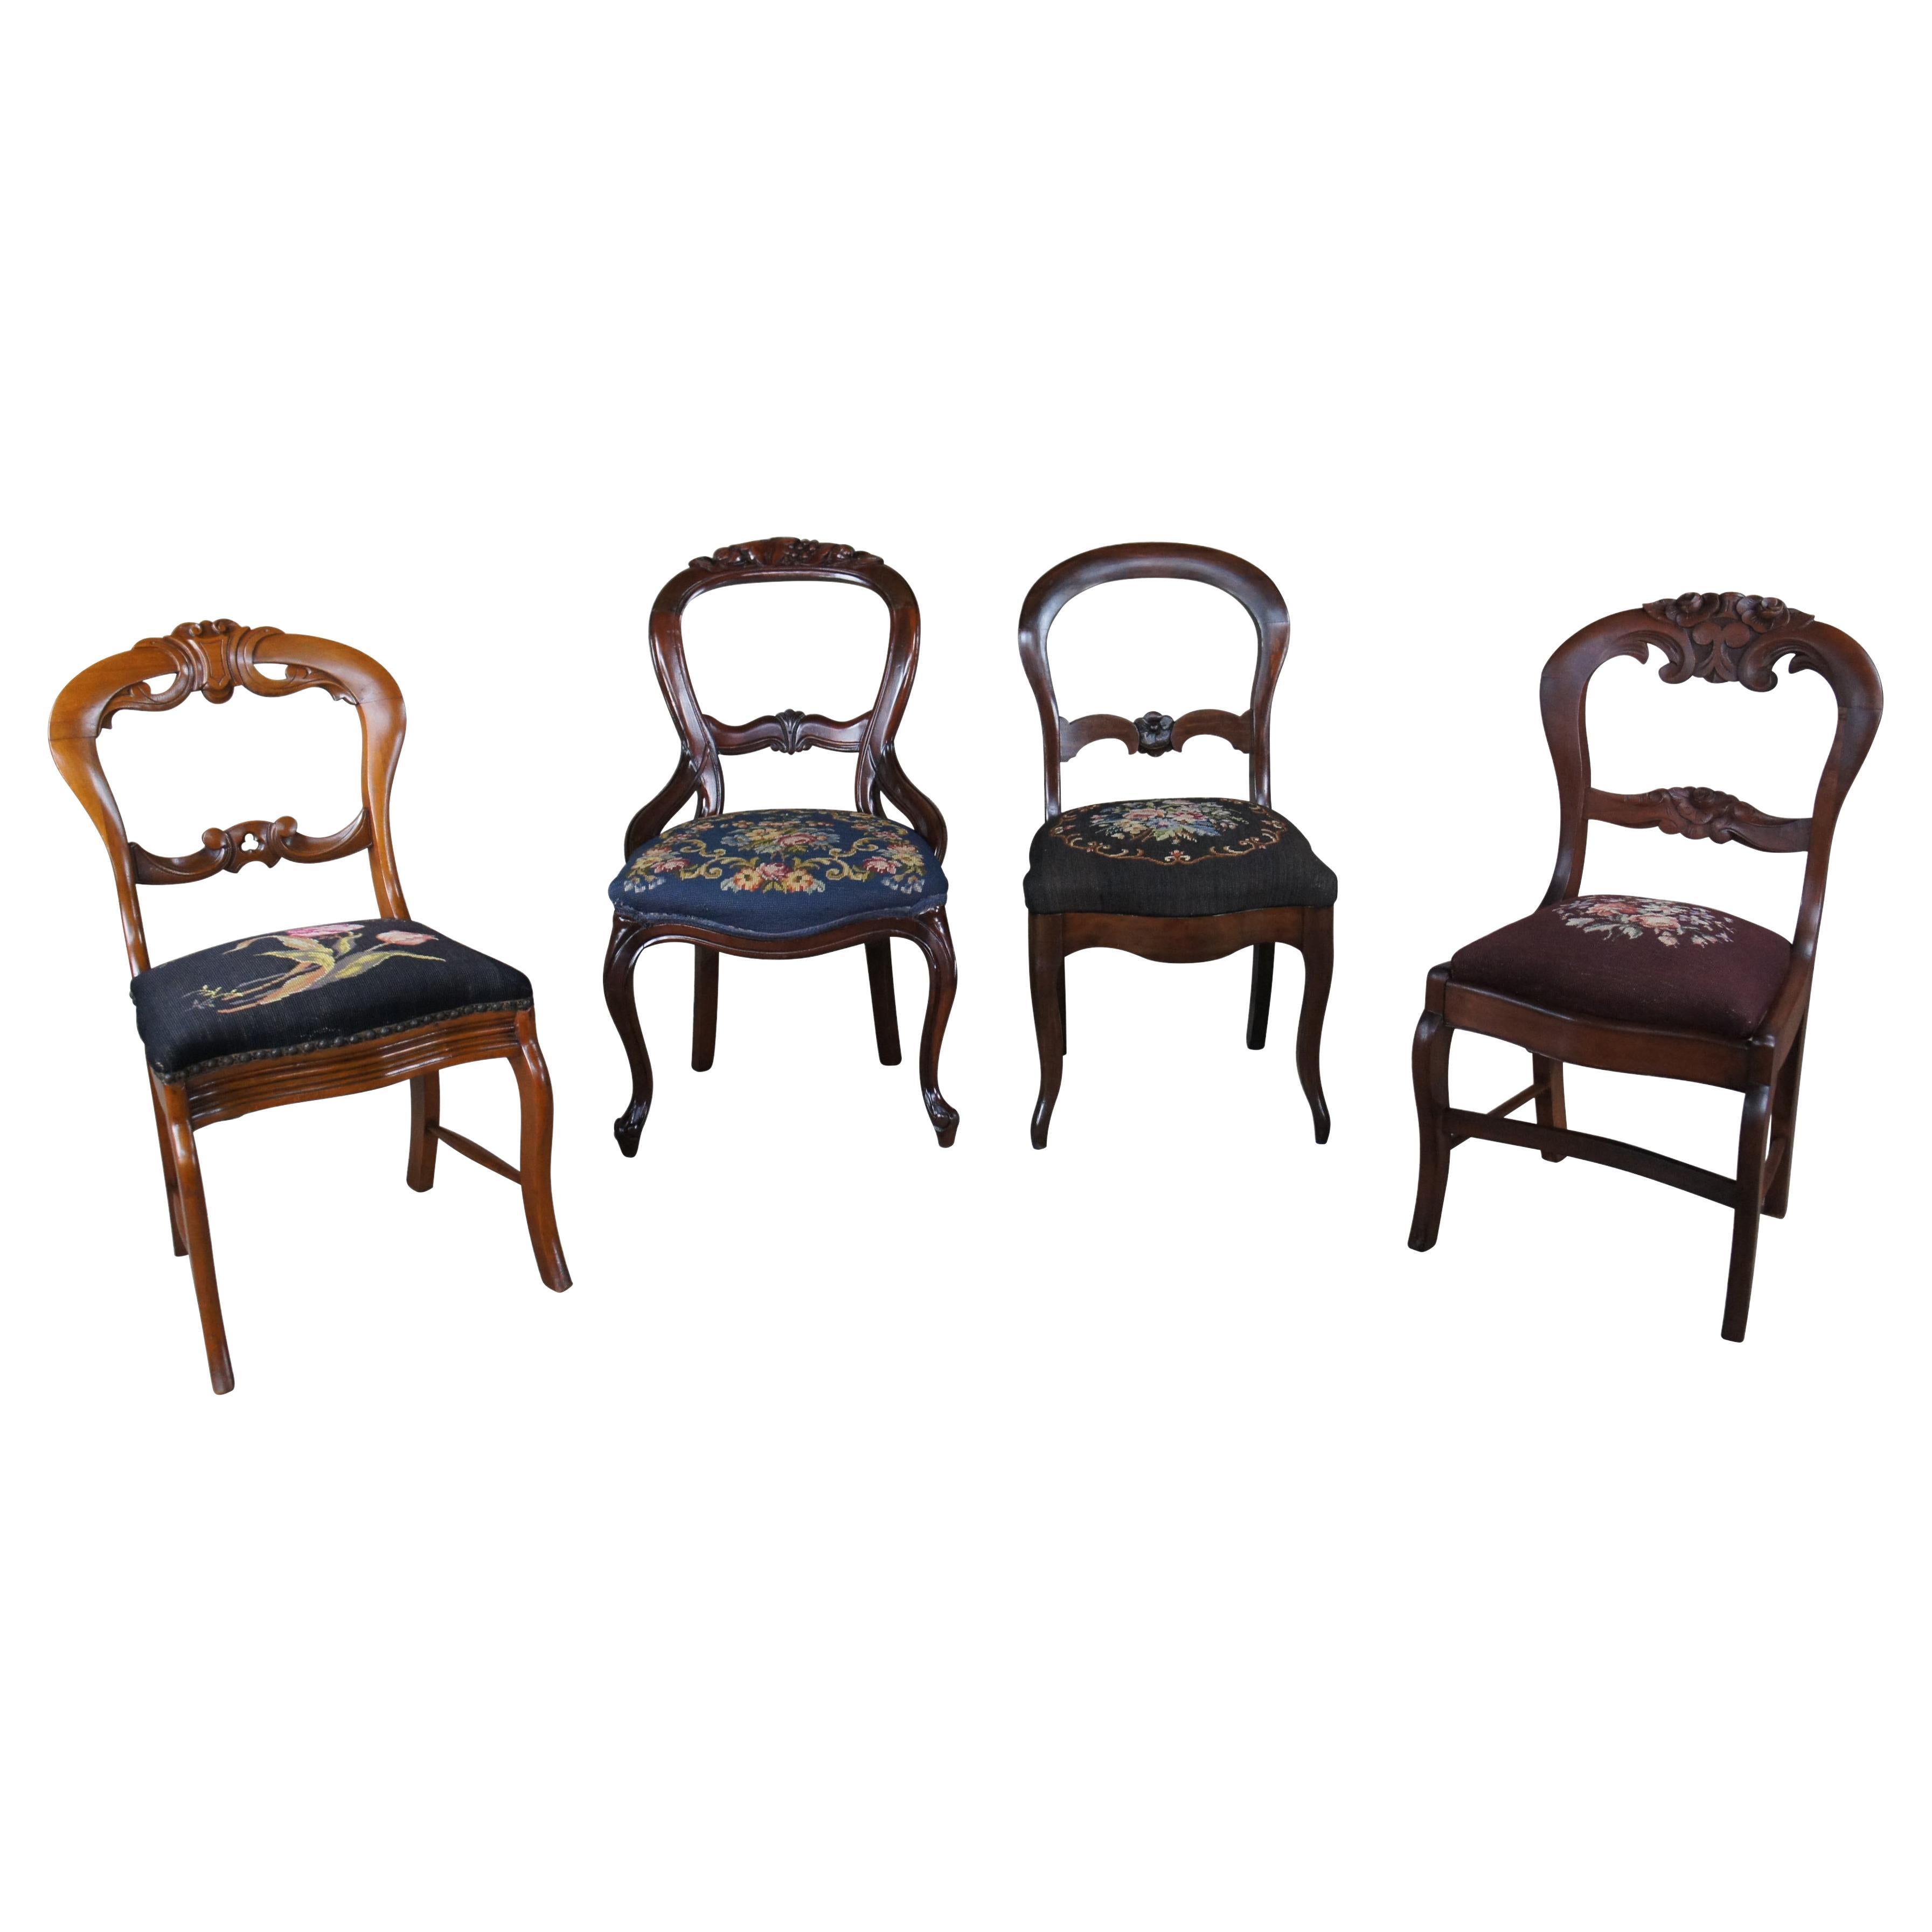 4 Antique Victorian Carved Mahogany Balloon Back Side Chairs Needlepoint Seat For Sale